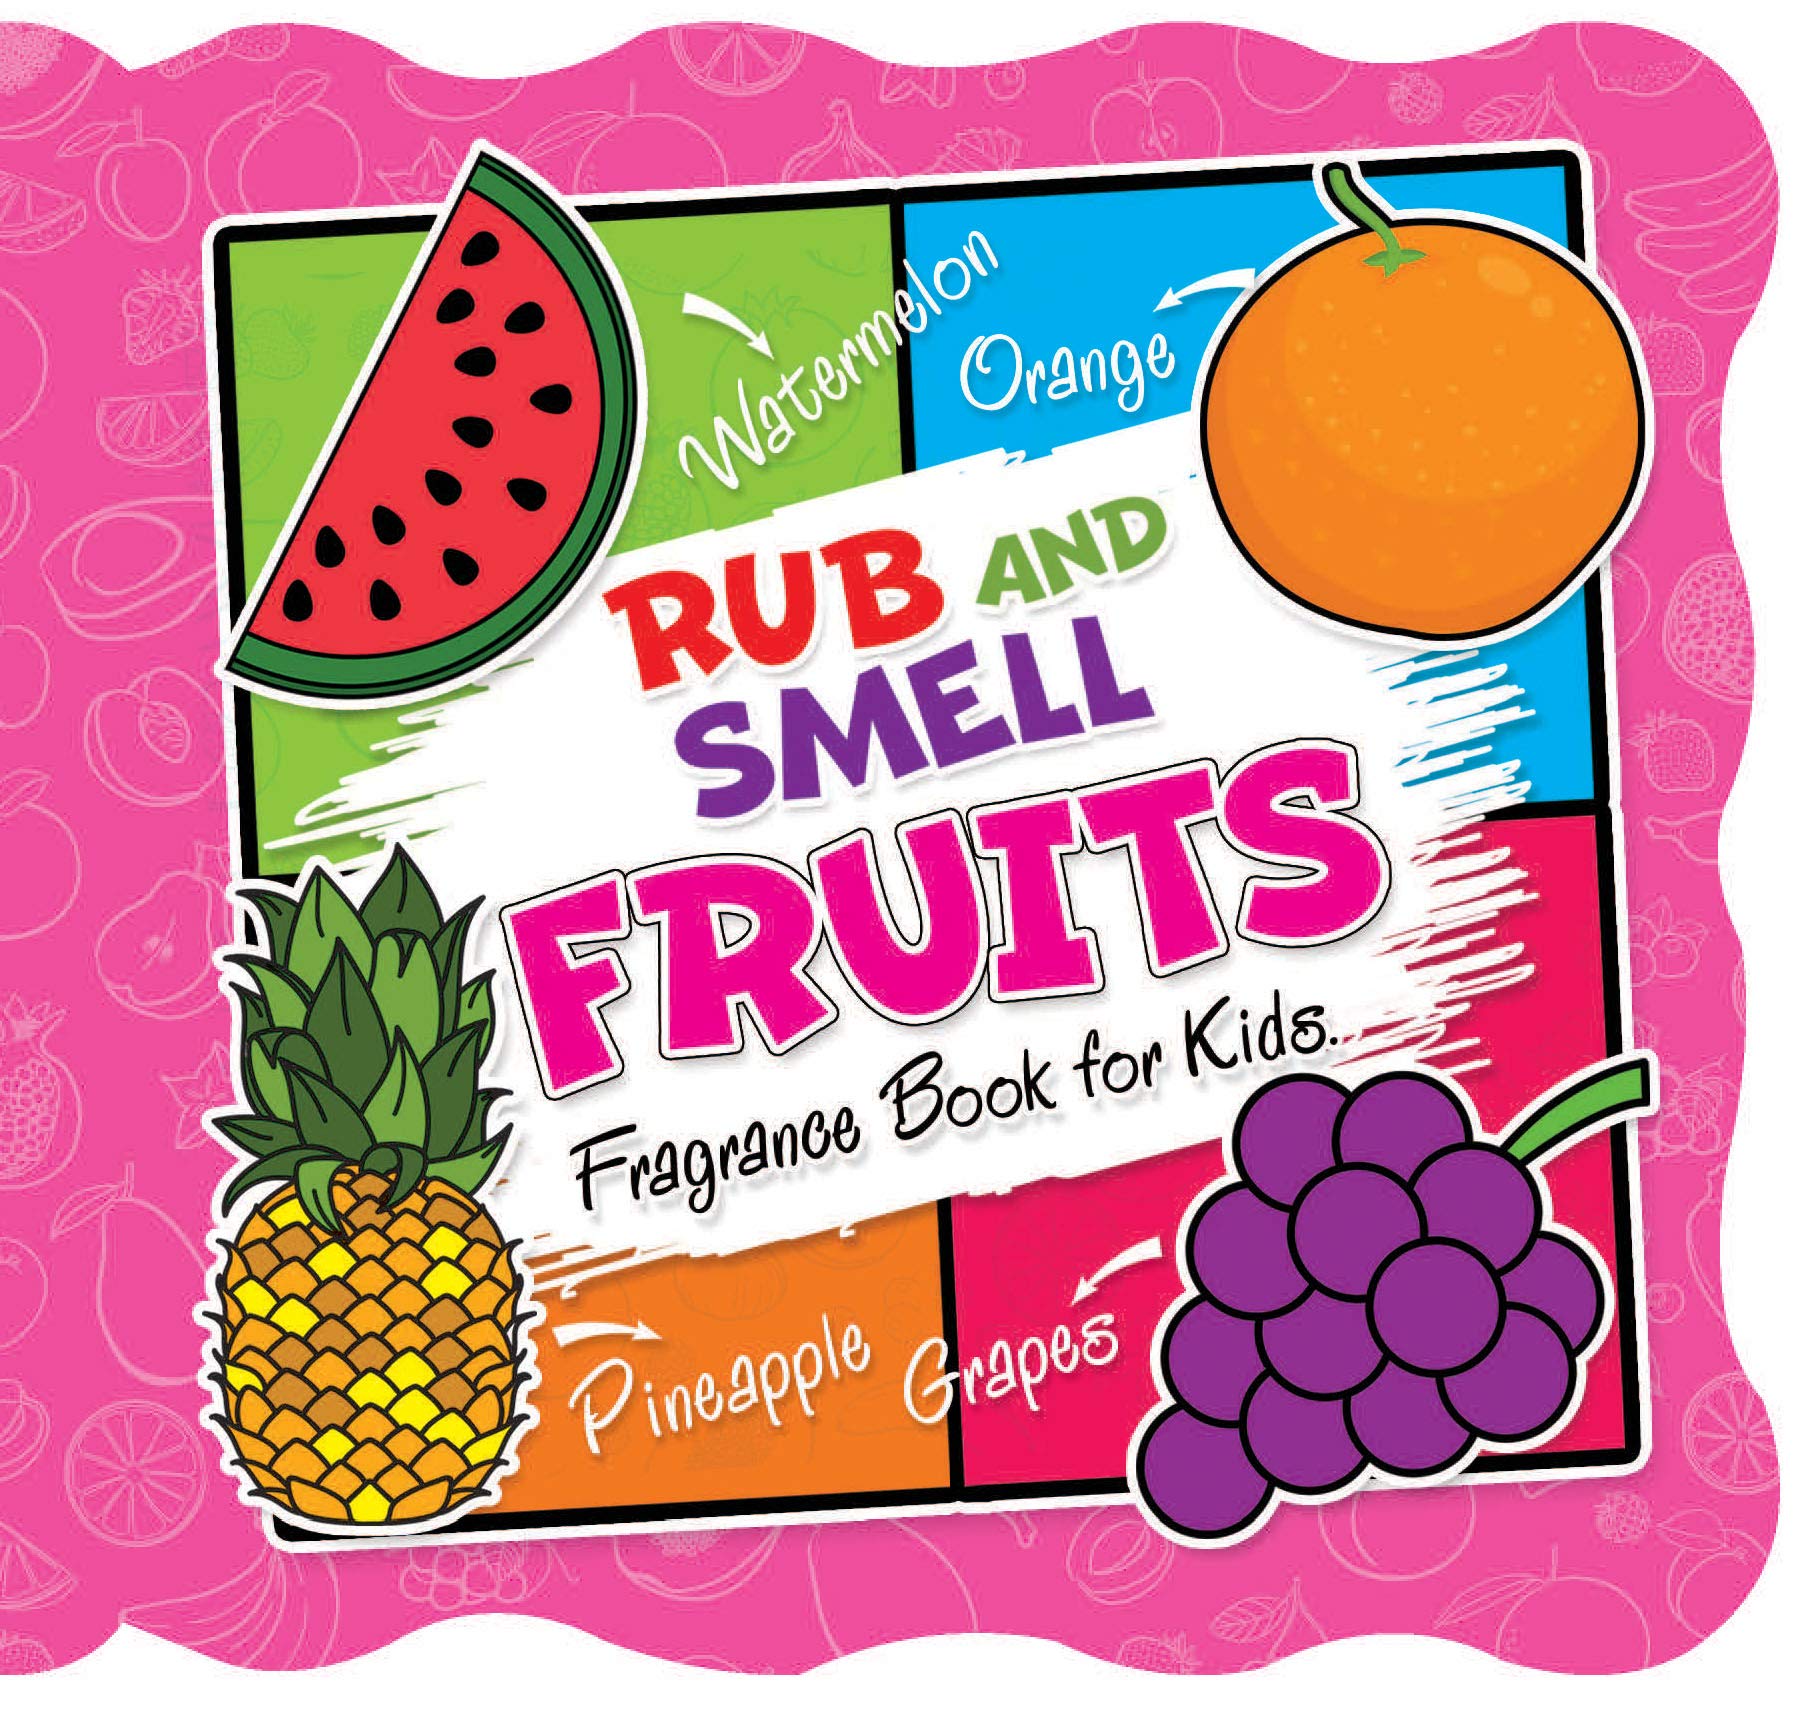 Rub and Smell - Fruits (Fragrance Book for Kids)